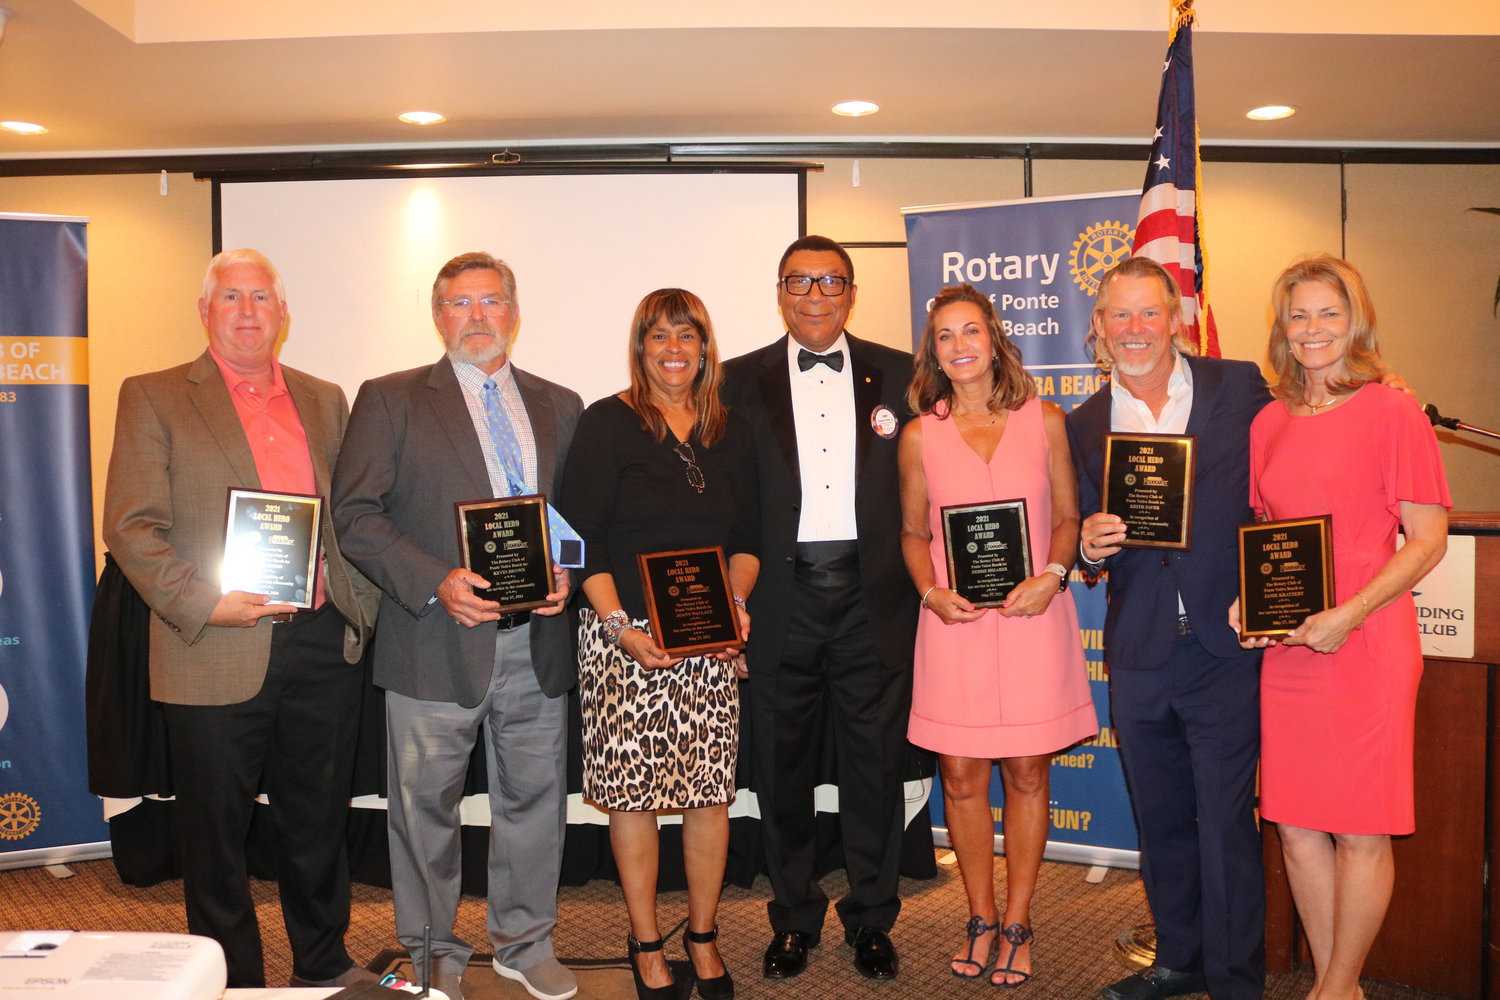 Rotary Club of Ponte Vedra Beach president Sam Hall (center) poses with the six recipients of the Local Heroes awards at event Thursday, May 27. The Rotary Club of Ponte Vedra Beach and the Ponte Vedra Recorder recognized a special group of area residents for their contributions to the community.